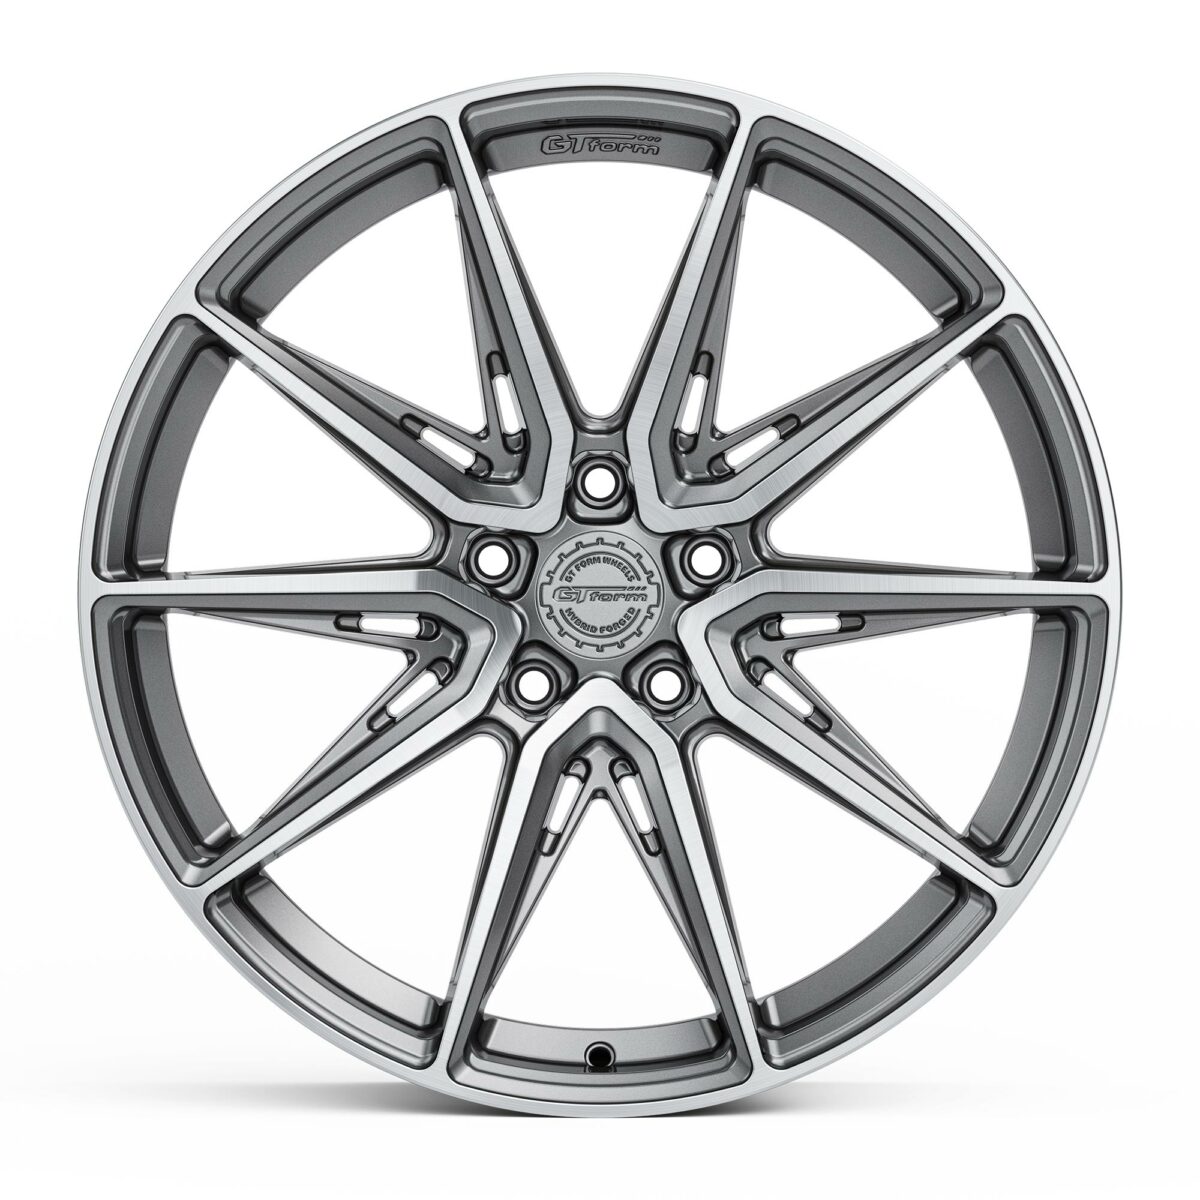 PERFORMANCE WHEELS GT FORM HF4.1 HYBRID FORGED BRUSHED TITANIUM 20X9 20X10.5 20X12 STAGGERED RIMS